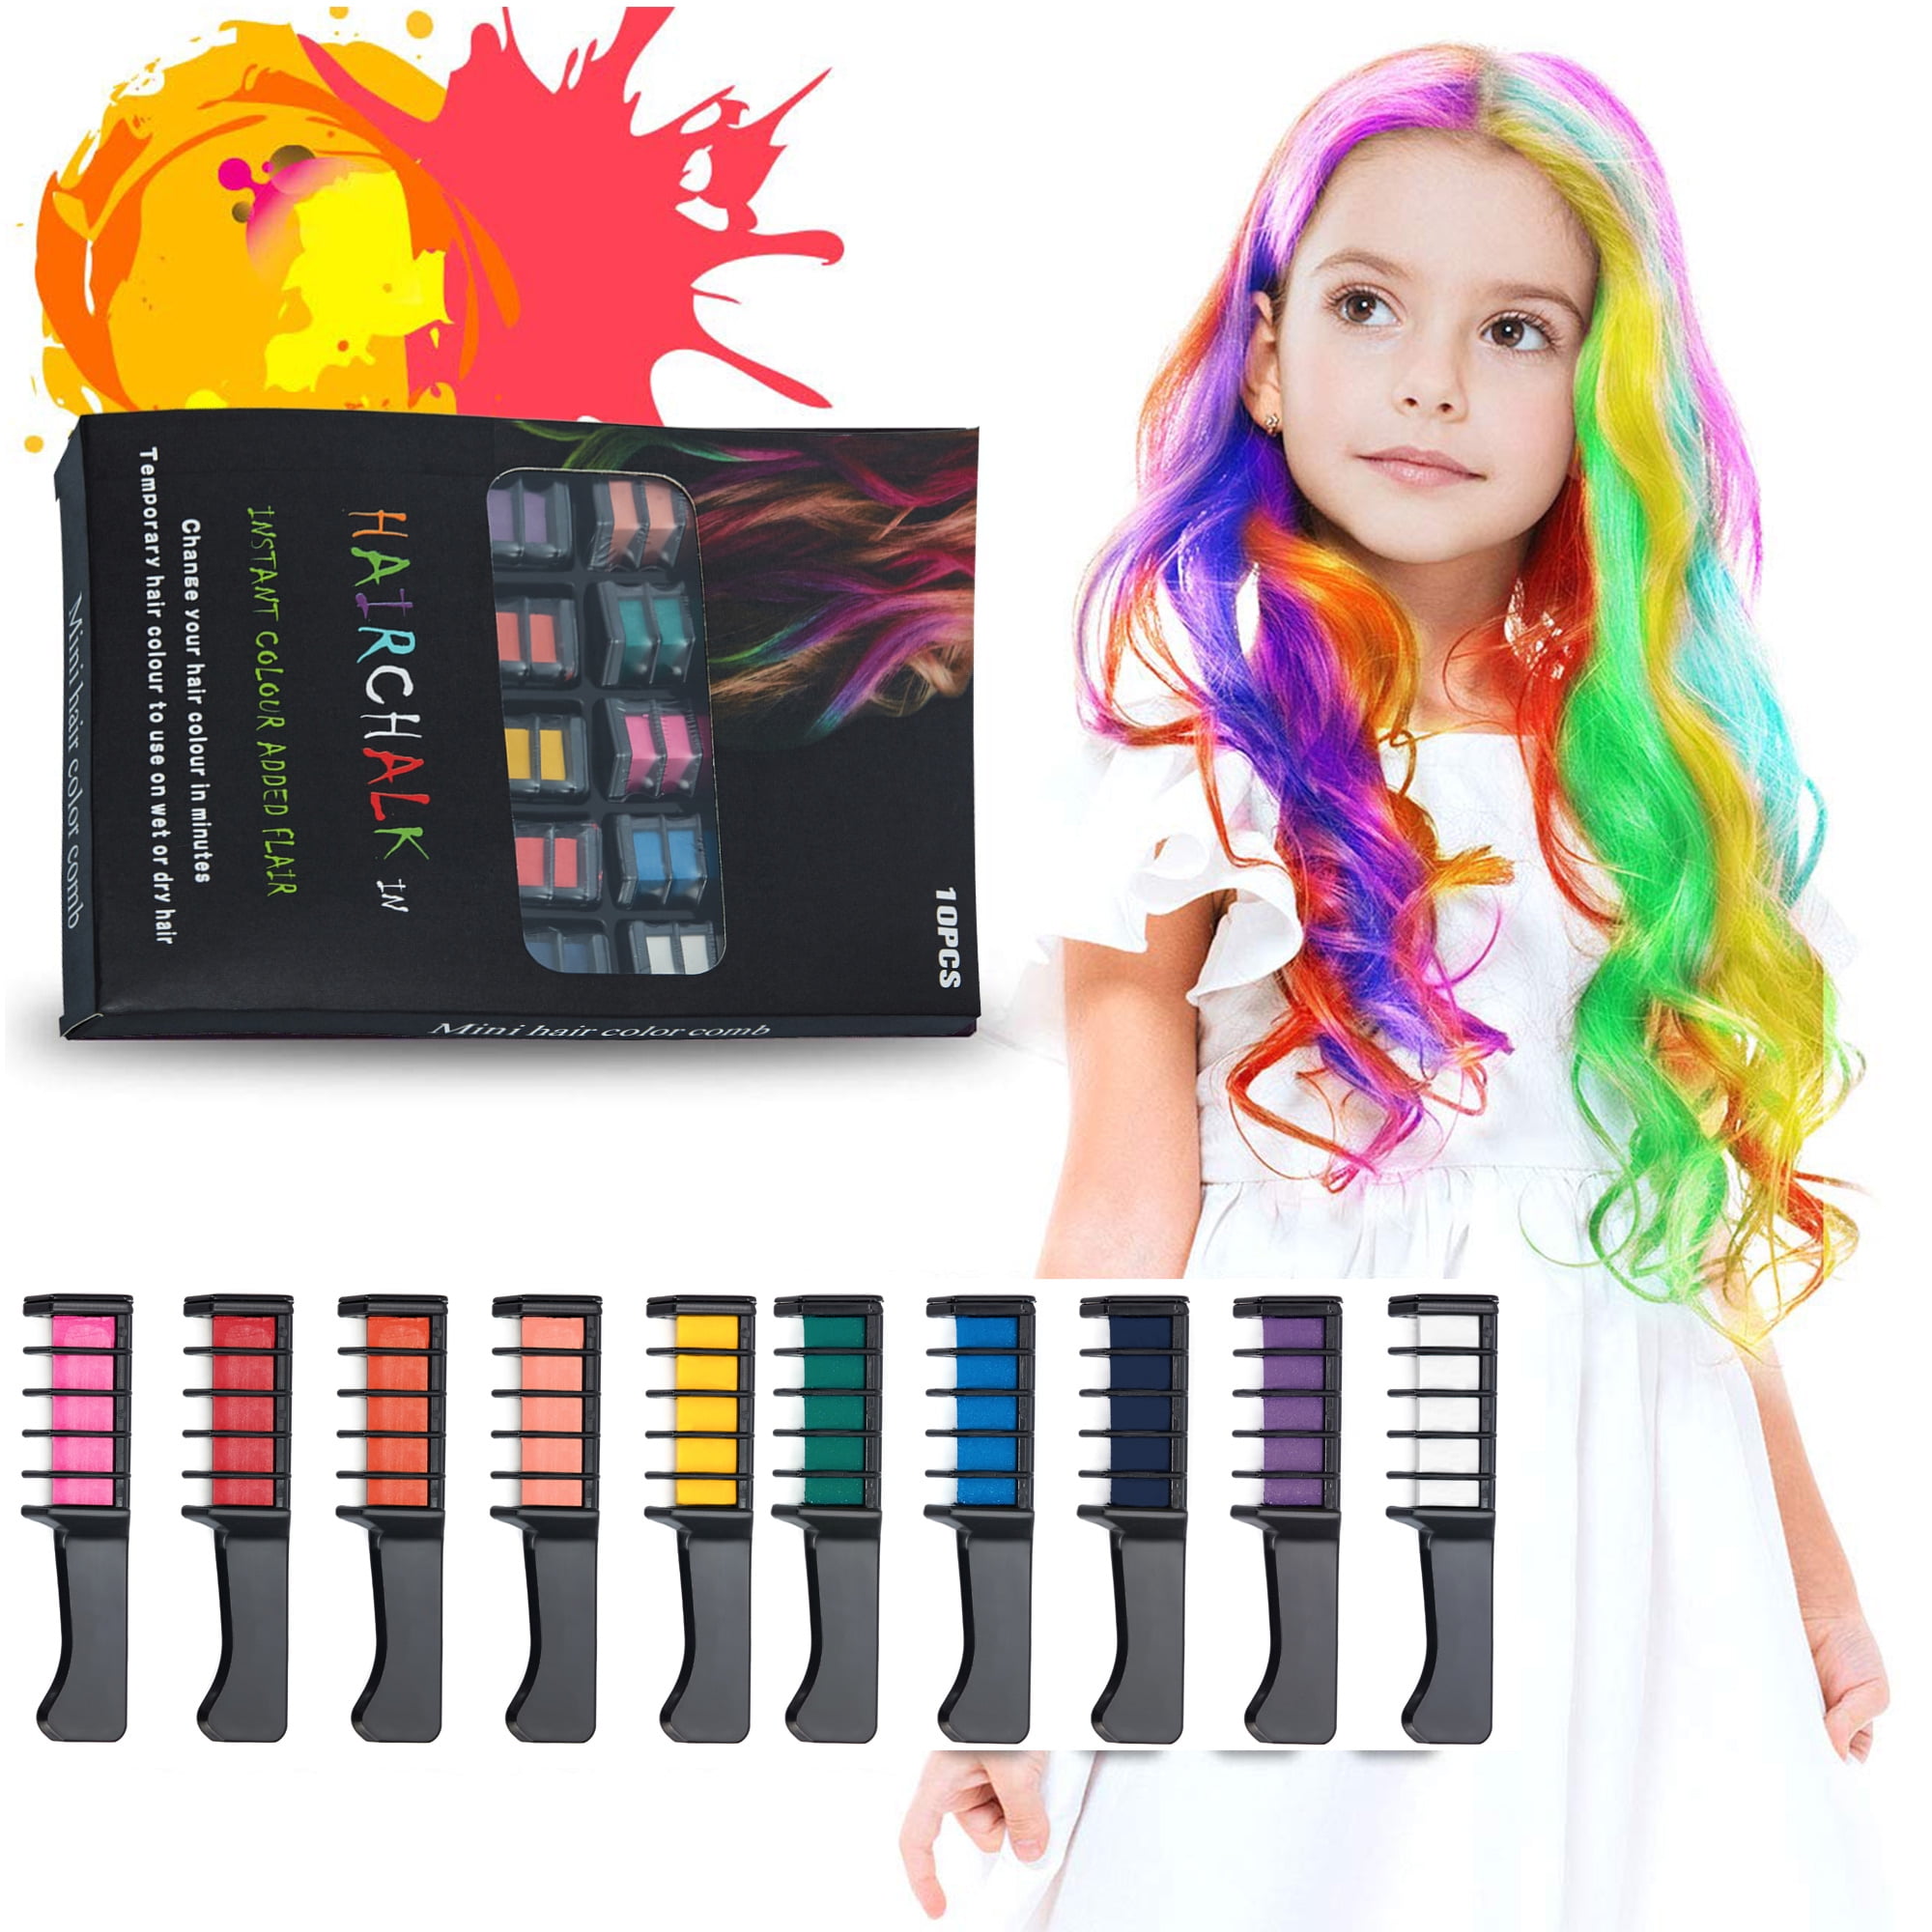 Hair Chalk Comb, Bright 10 Colors Temporary Hair Dye Marker Birthday Gifts,  Washable Hair Dye for Adults, Girls,Kids 8 9 10 11 12 year old 